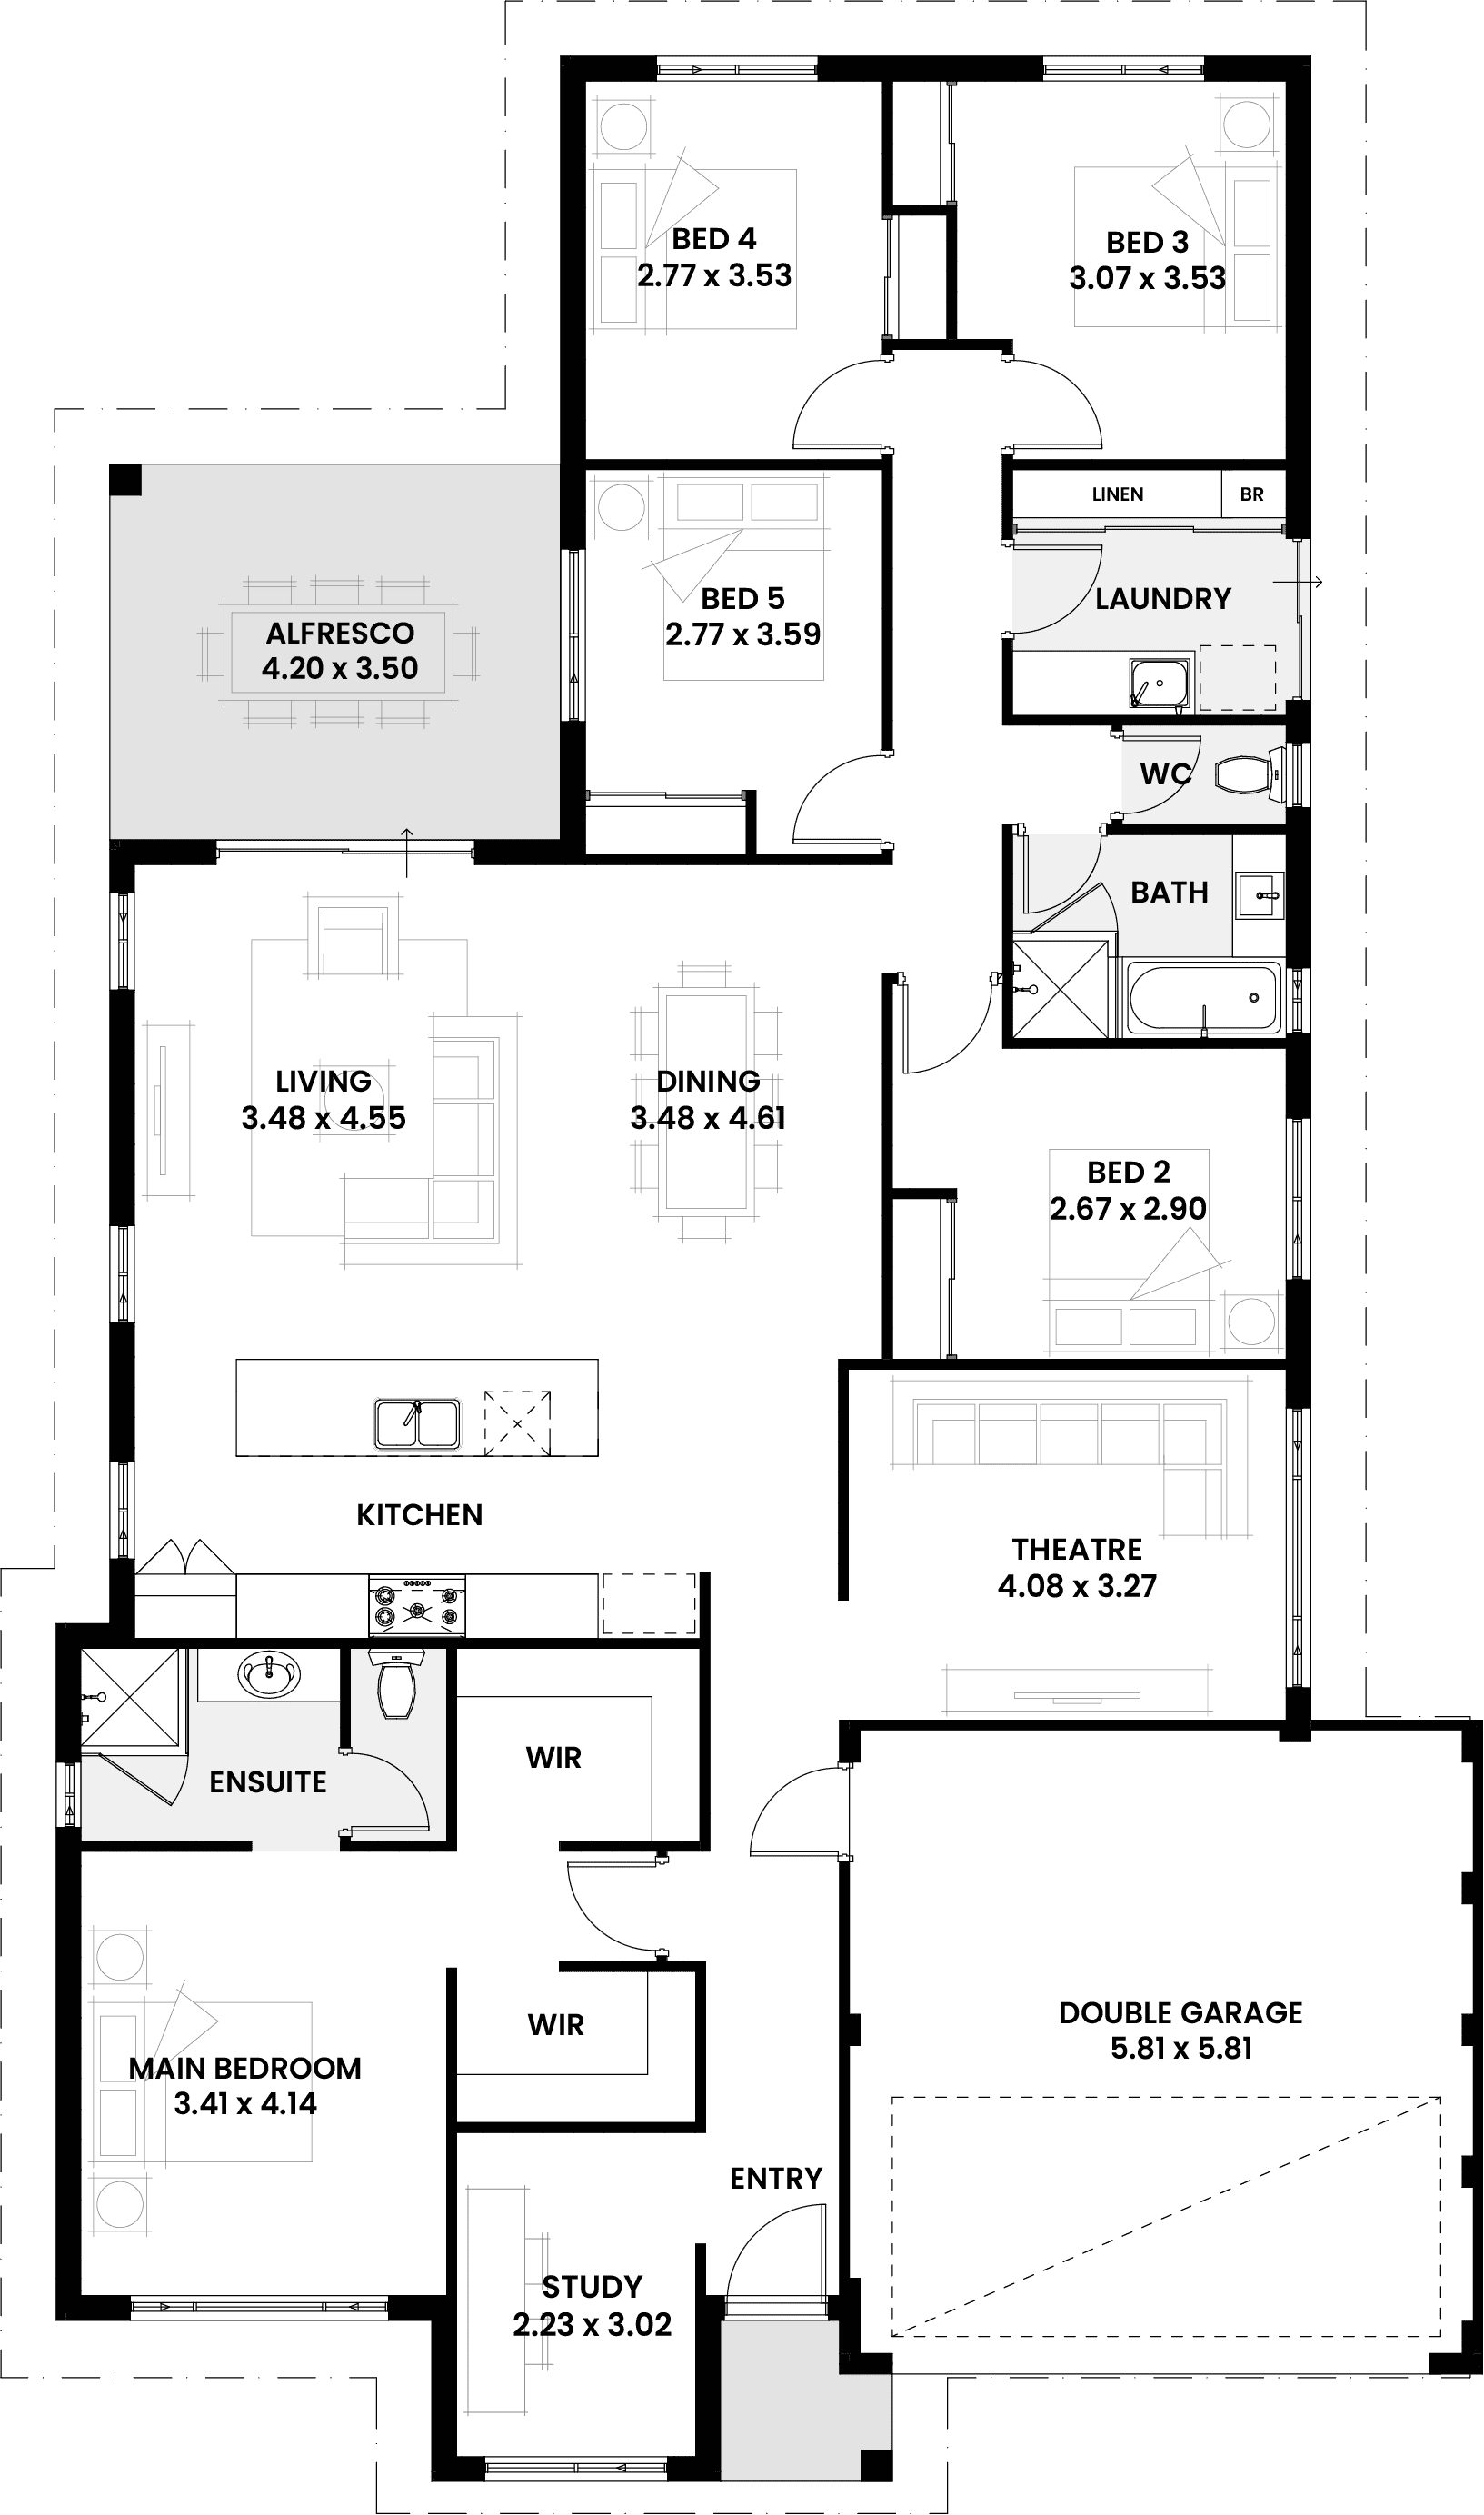 Floorplan for The Cedar, a Move Homes new home design perfect for first time buyers and new builders in Perth